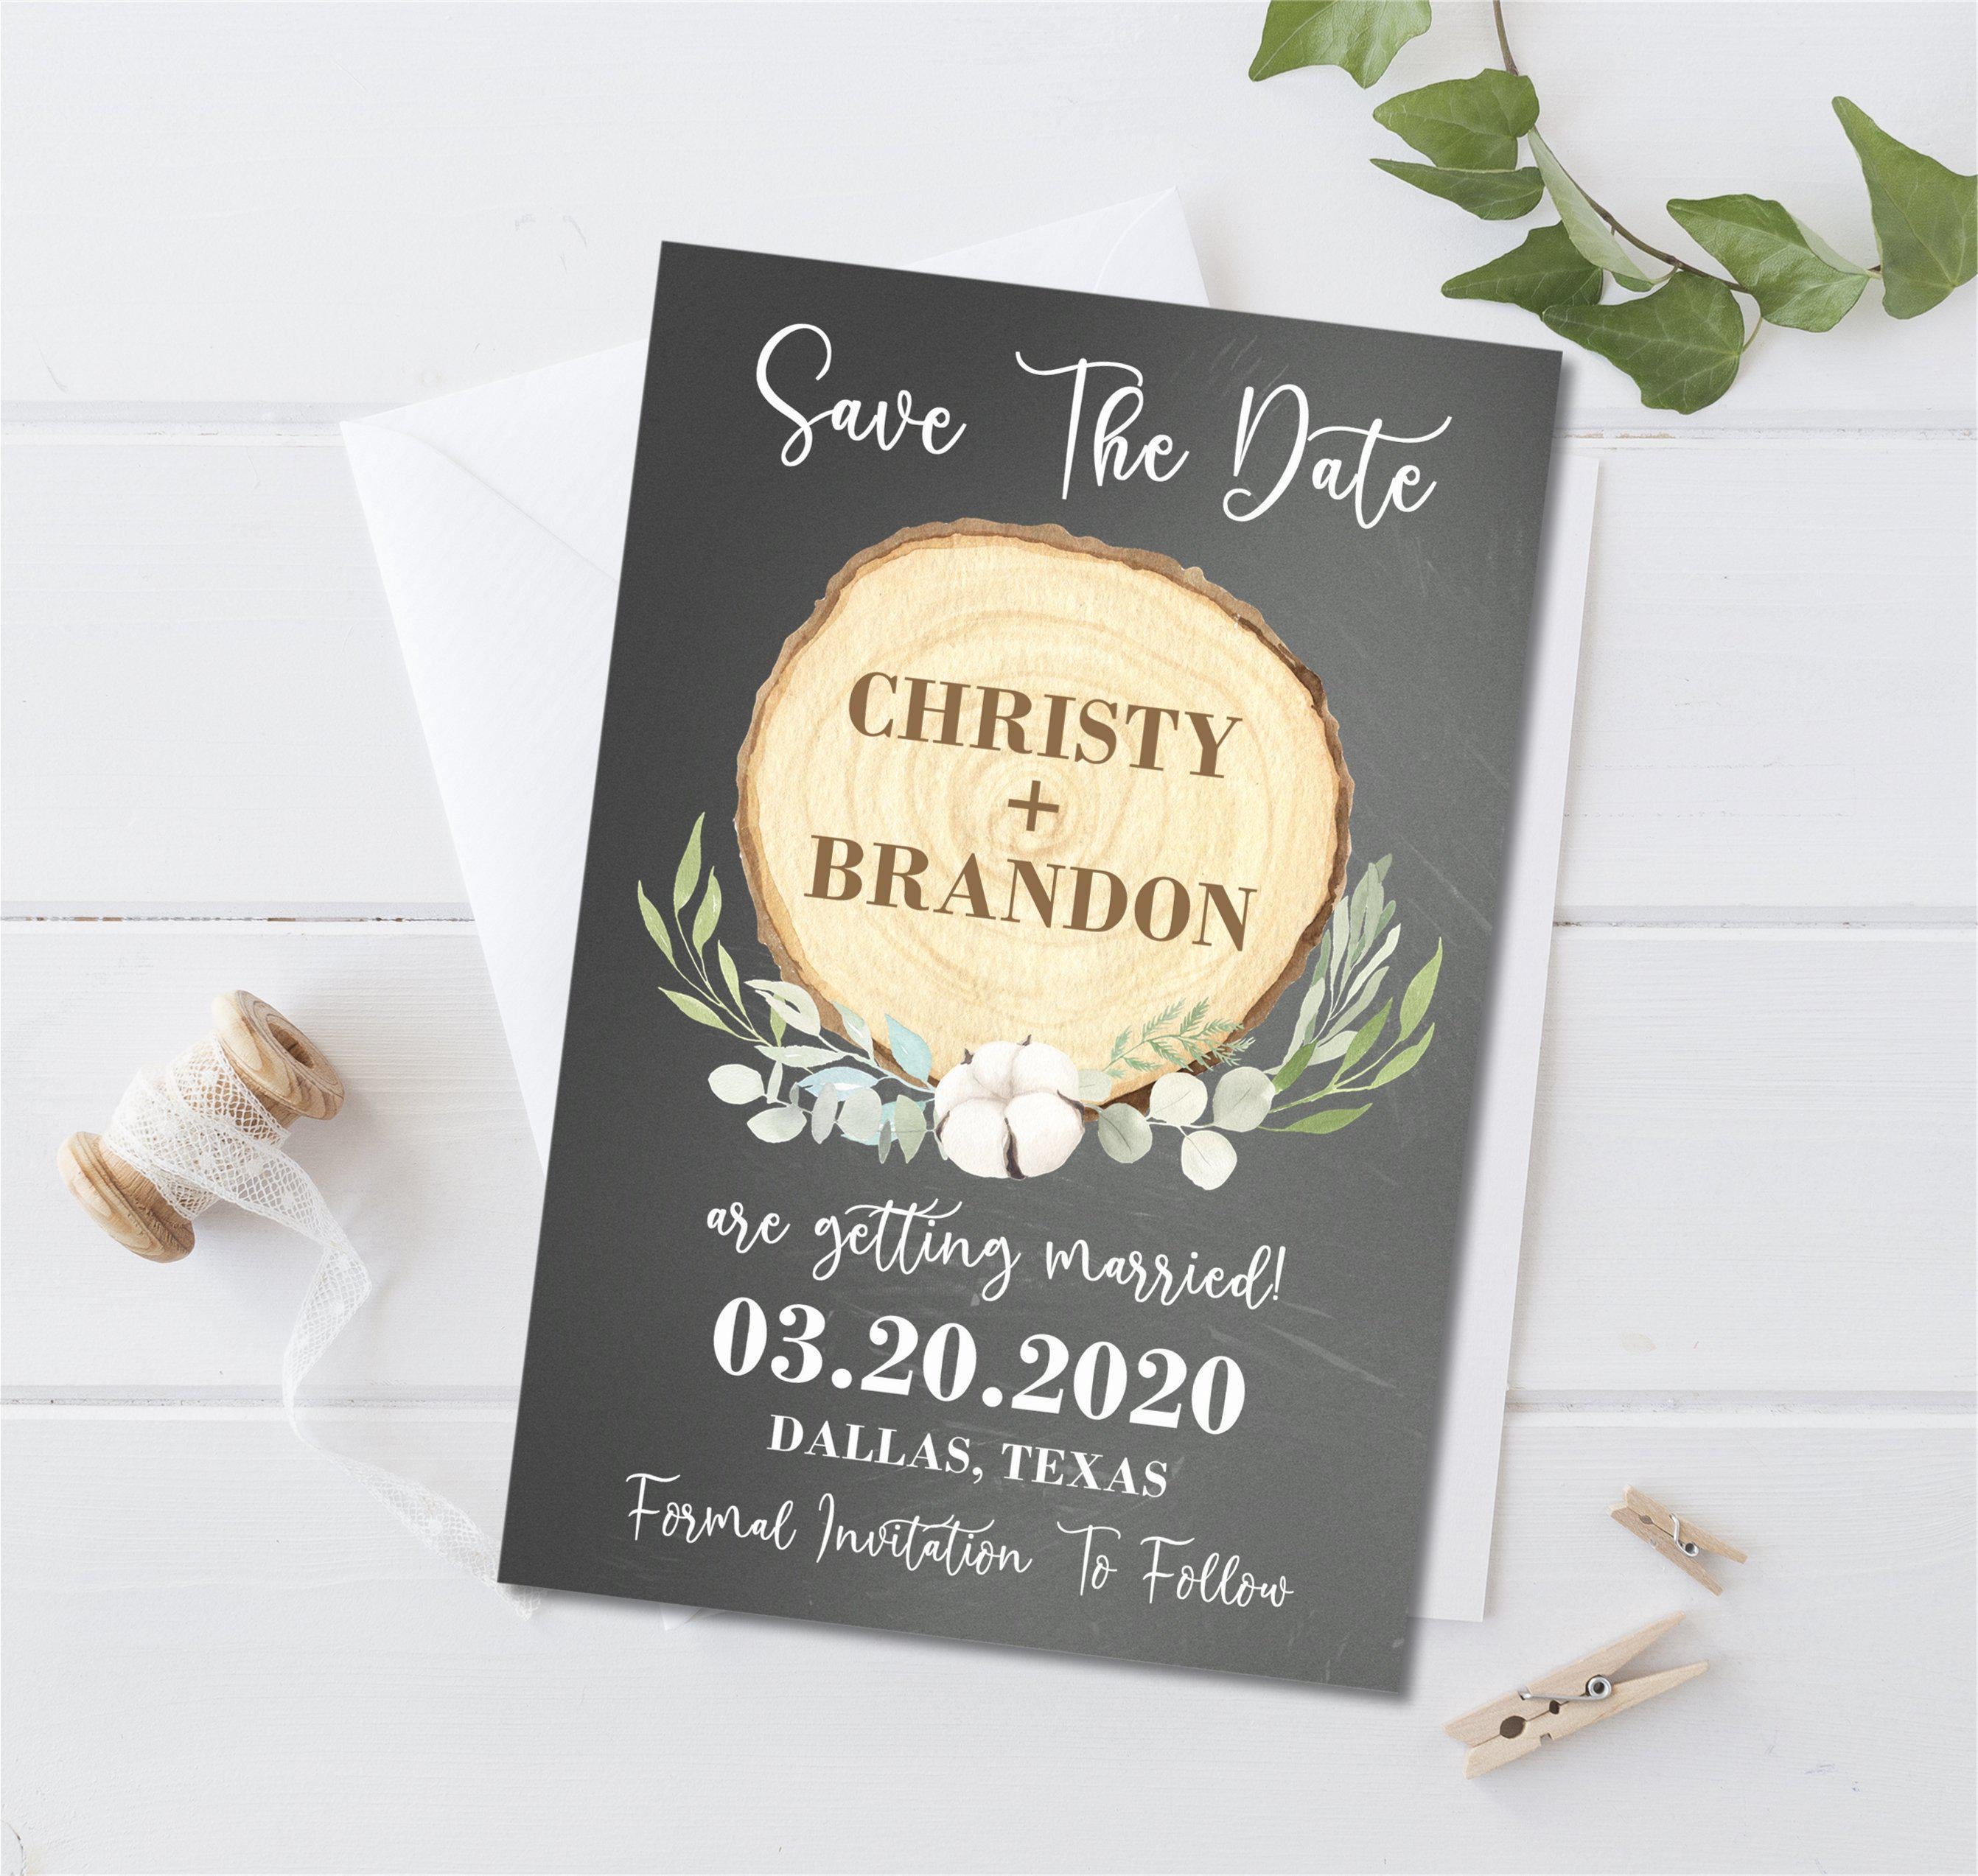 Rustic Woodslice Wedding Save The Date Cards